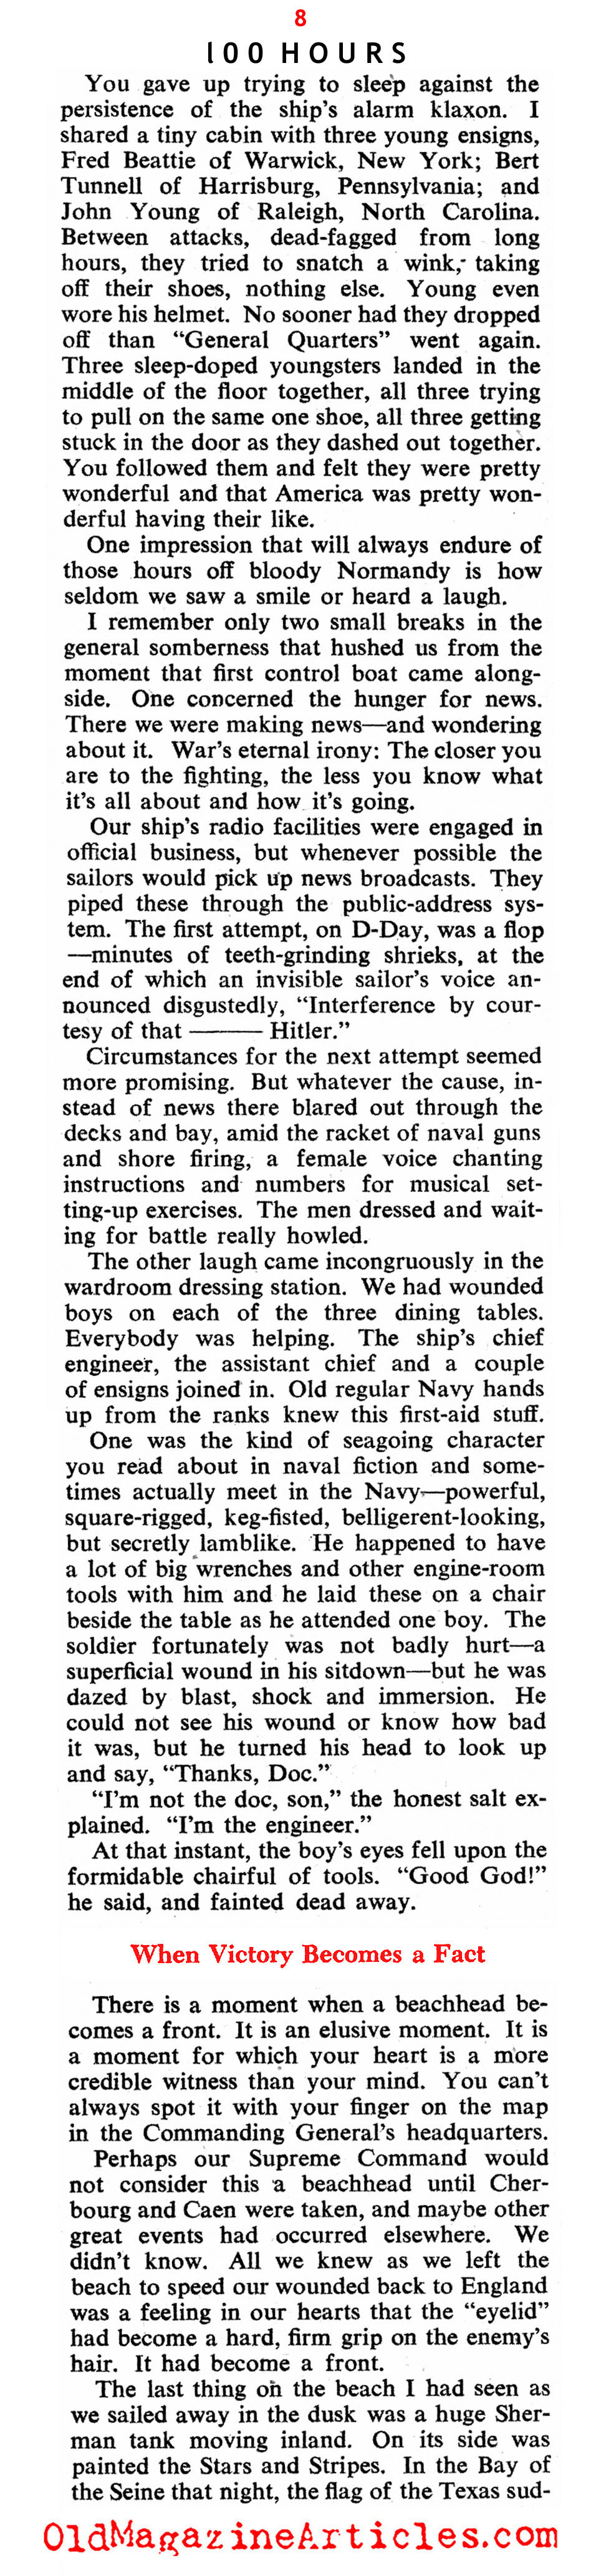 The First 100 Hours (Collier's Magazine, 1944)